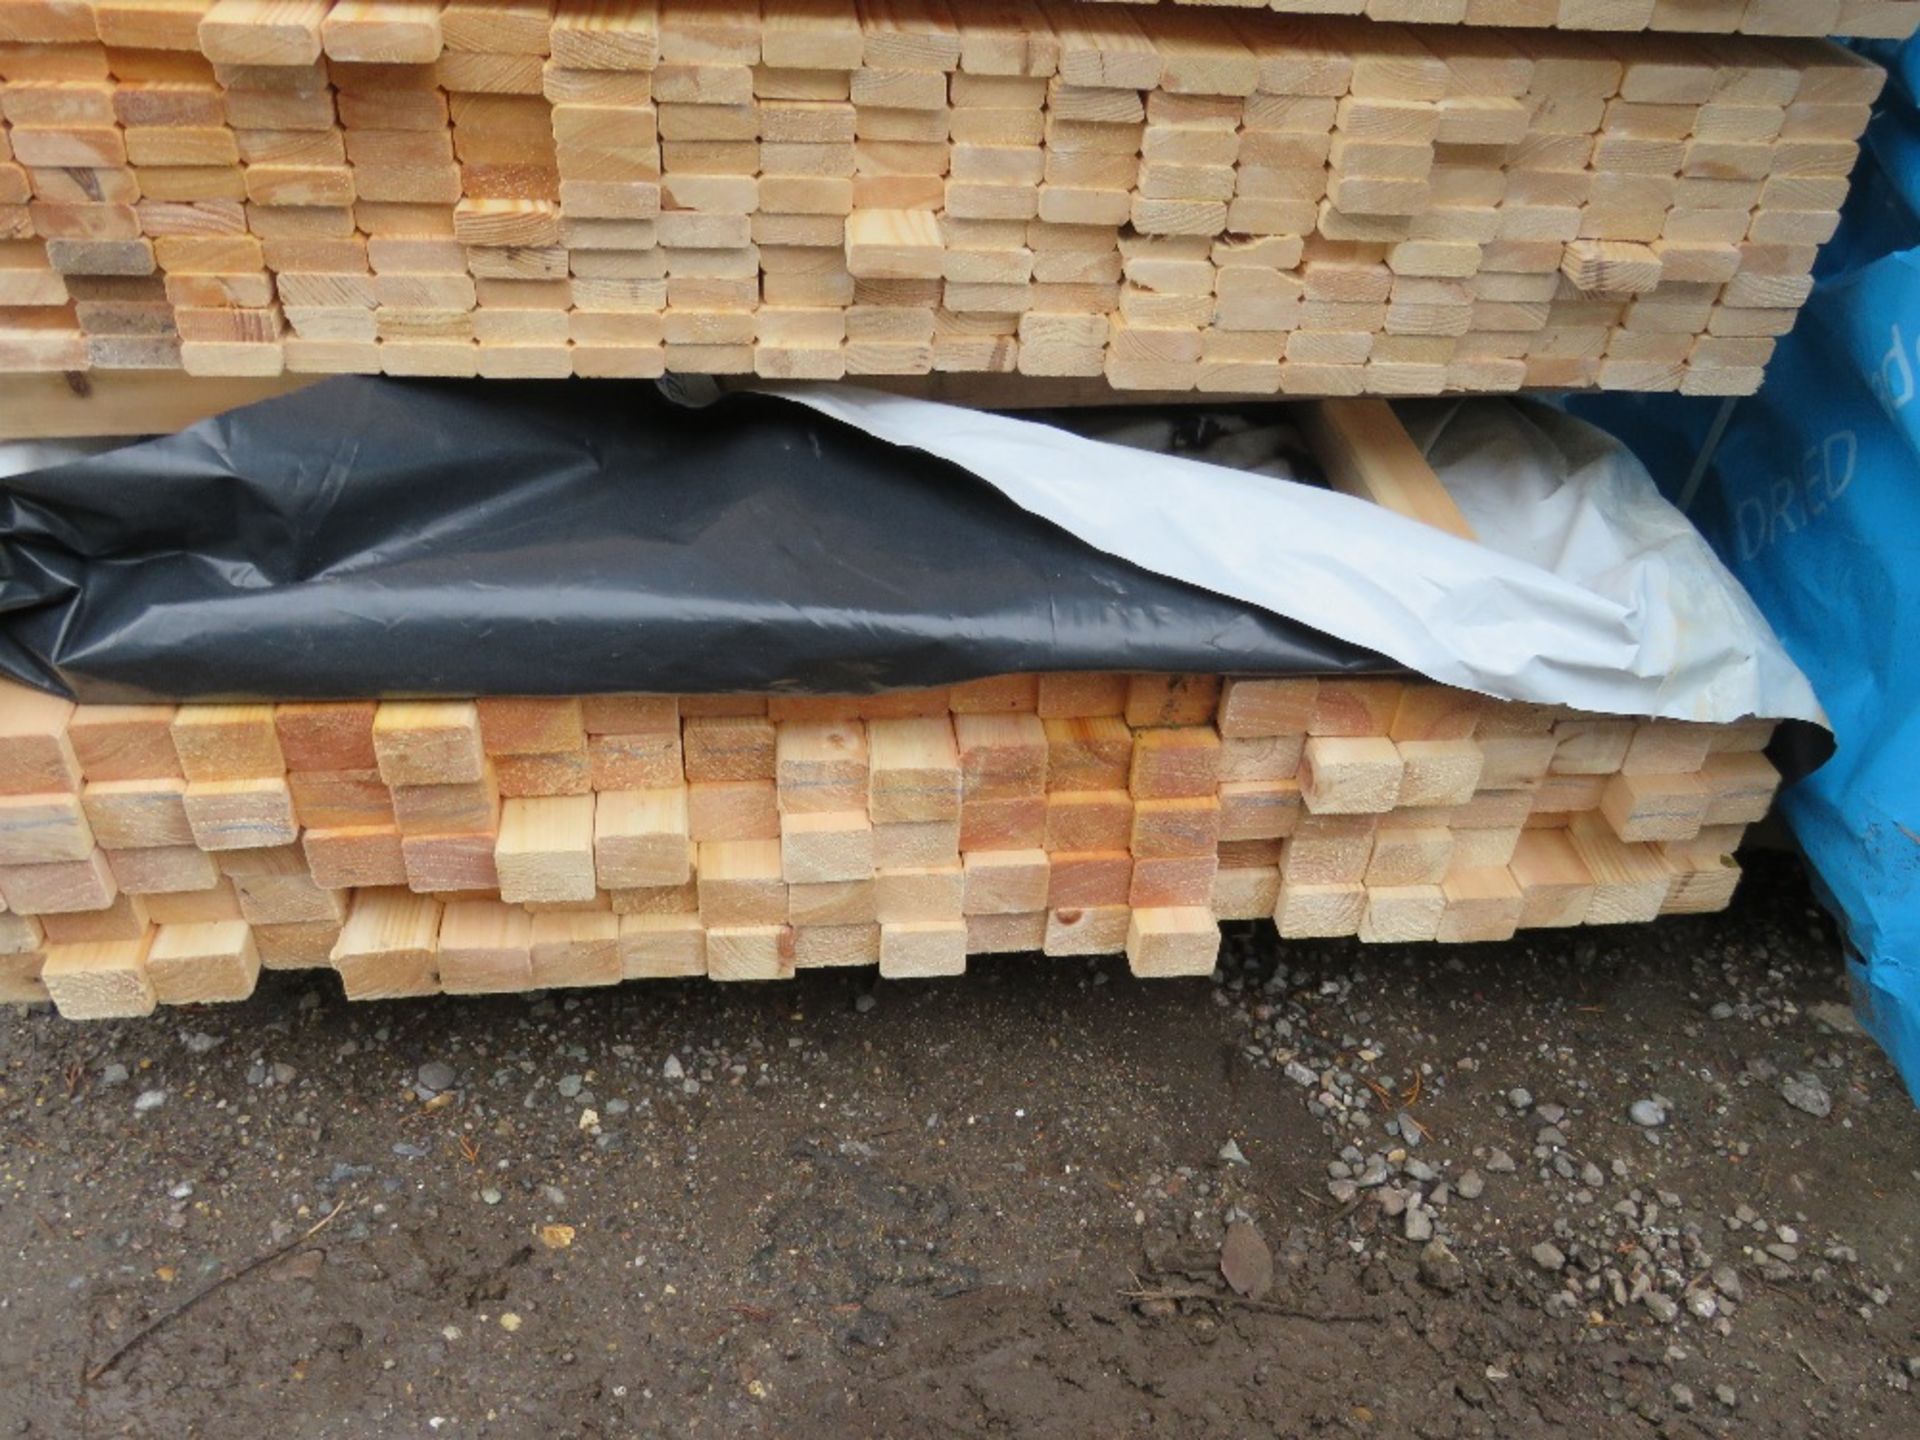 STACK OF 4 SMALL BUNDLES OF ASSORTED FENCING TIMBERS, 1.8M LENGTH APPROX. - Image 3 of 6